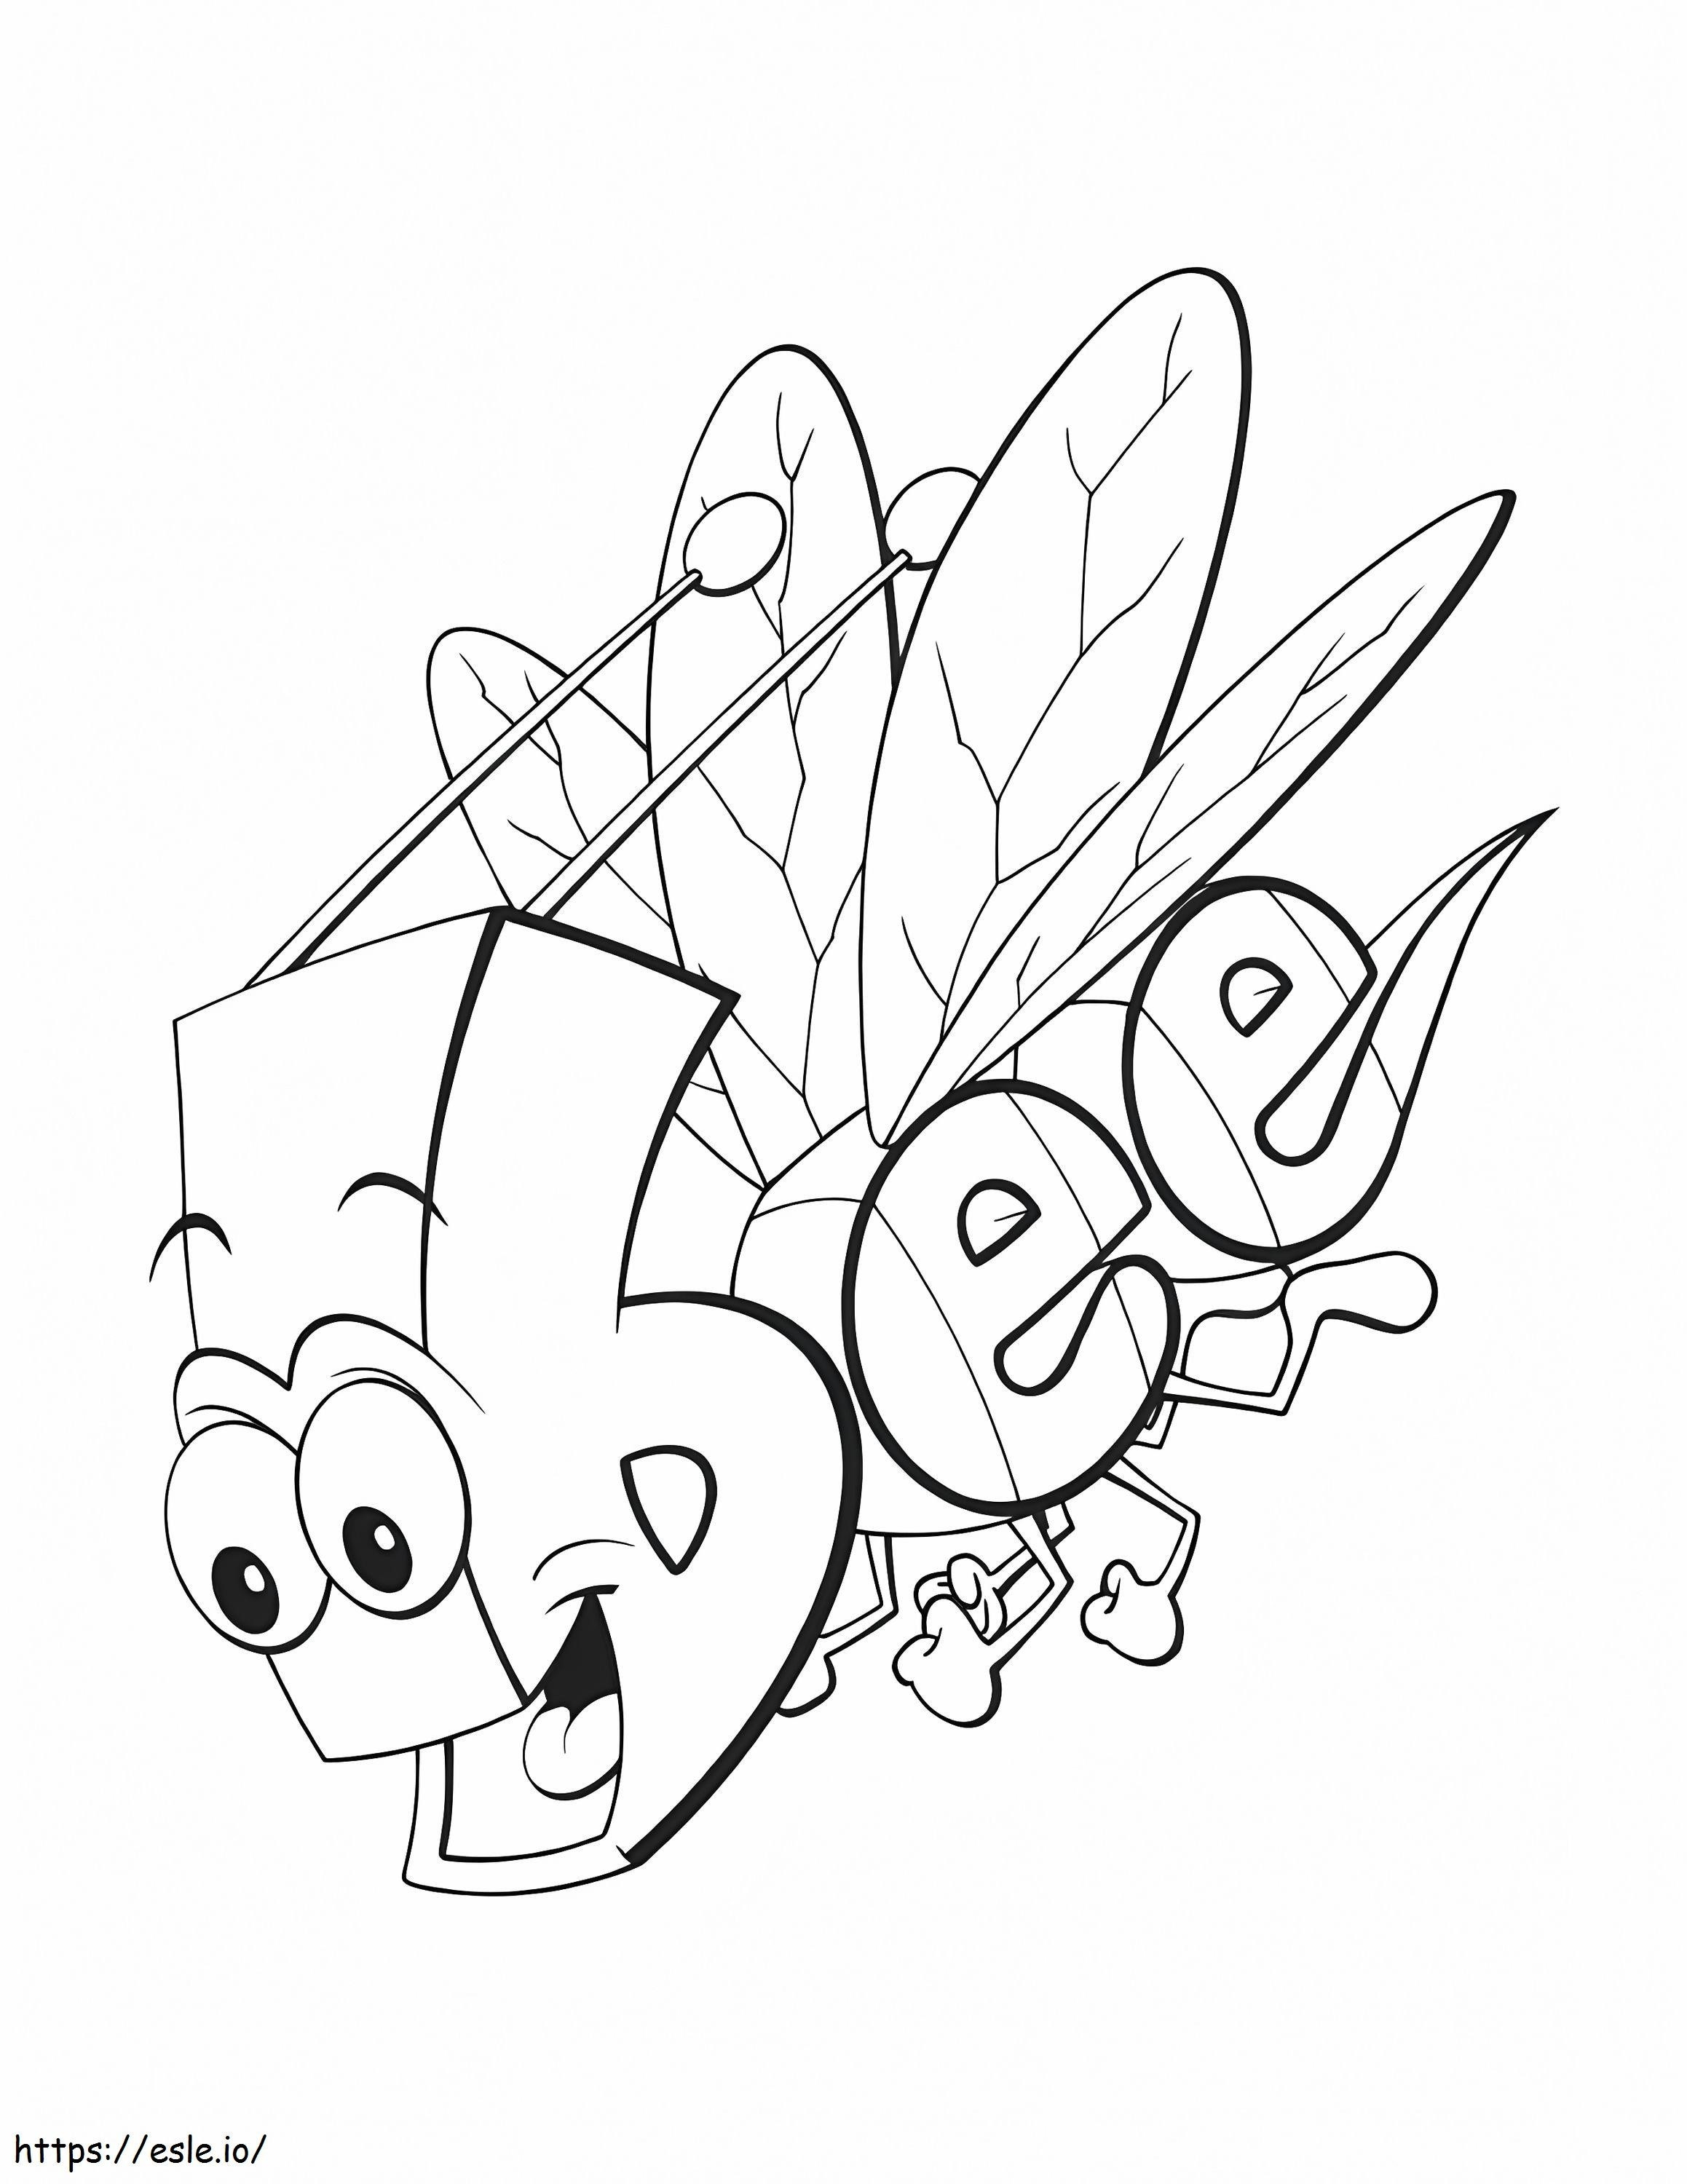 Bee WordWorld Coloring Page coloring page